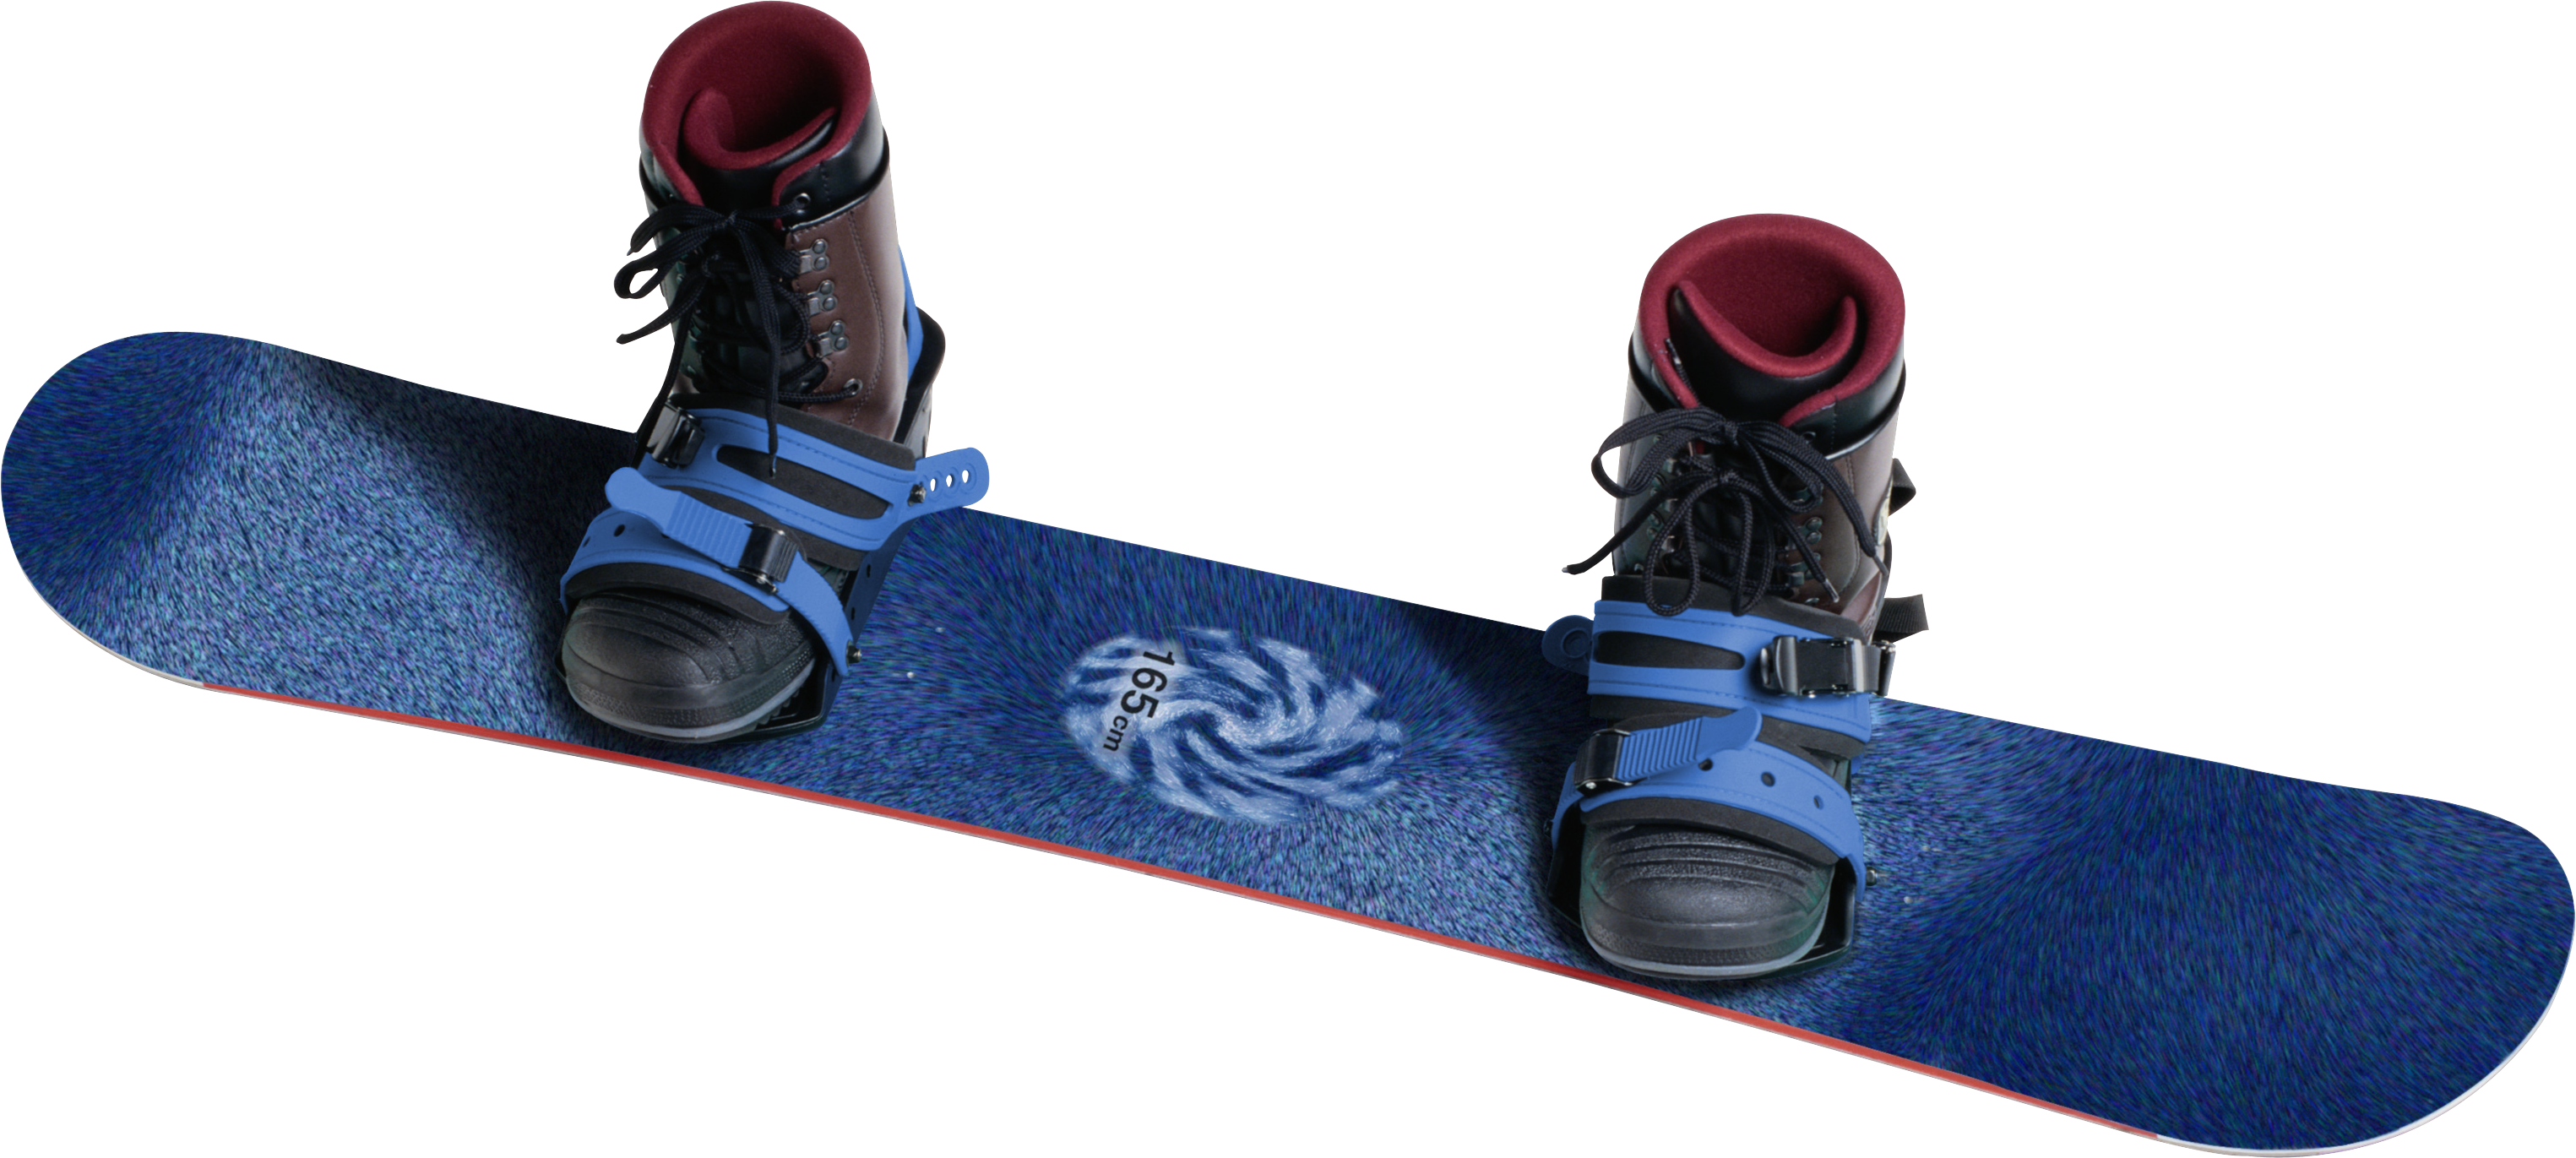 Snowboard Png Image - Transparent Background Snowboard Clipart (3050x1371), Png Download